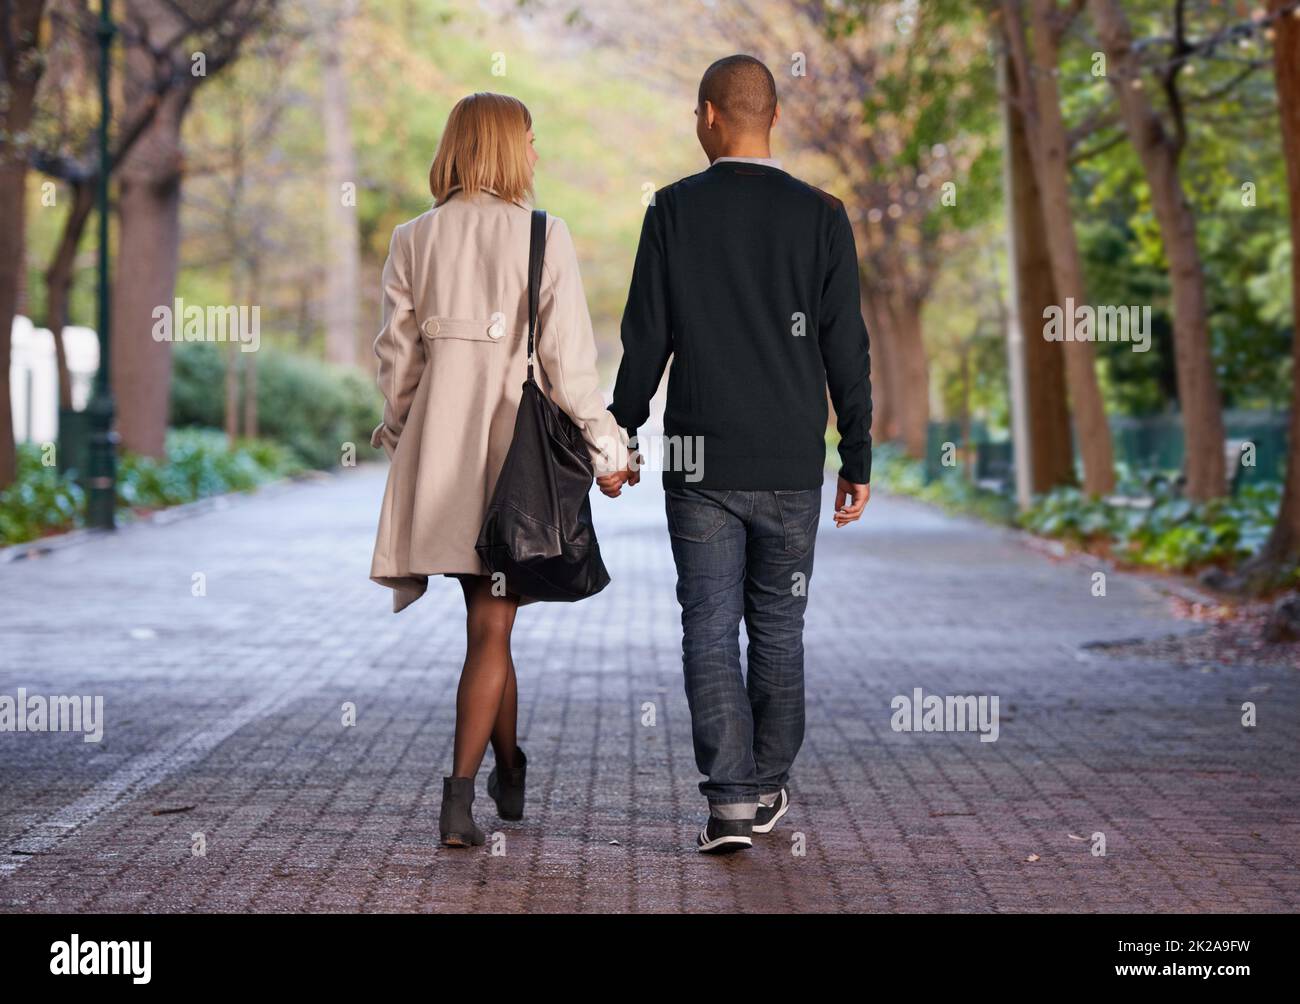 This is what love is all about. Full length rearview shot of a young couple walking hand in hand in a park. Stock Photo